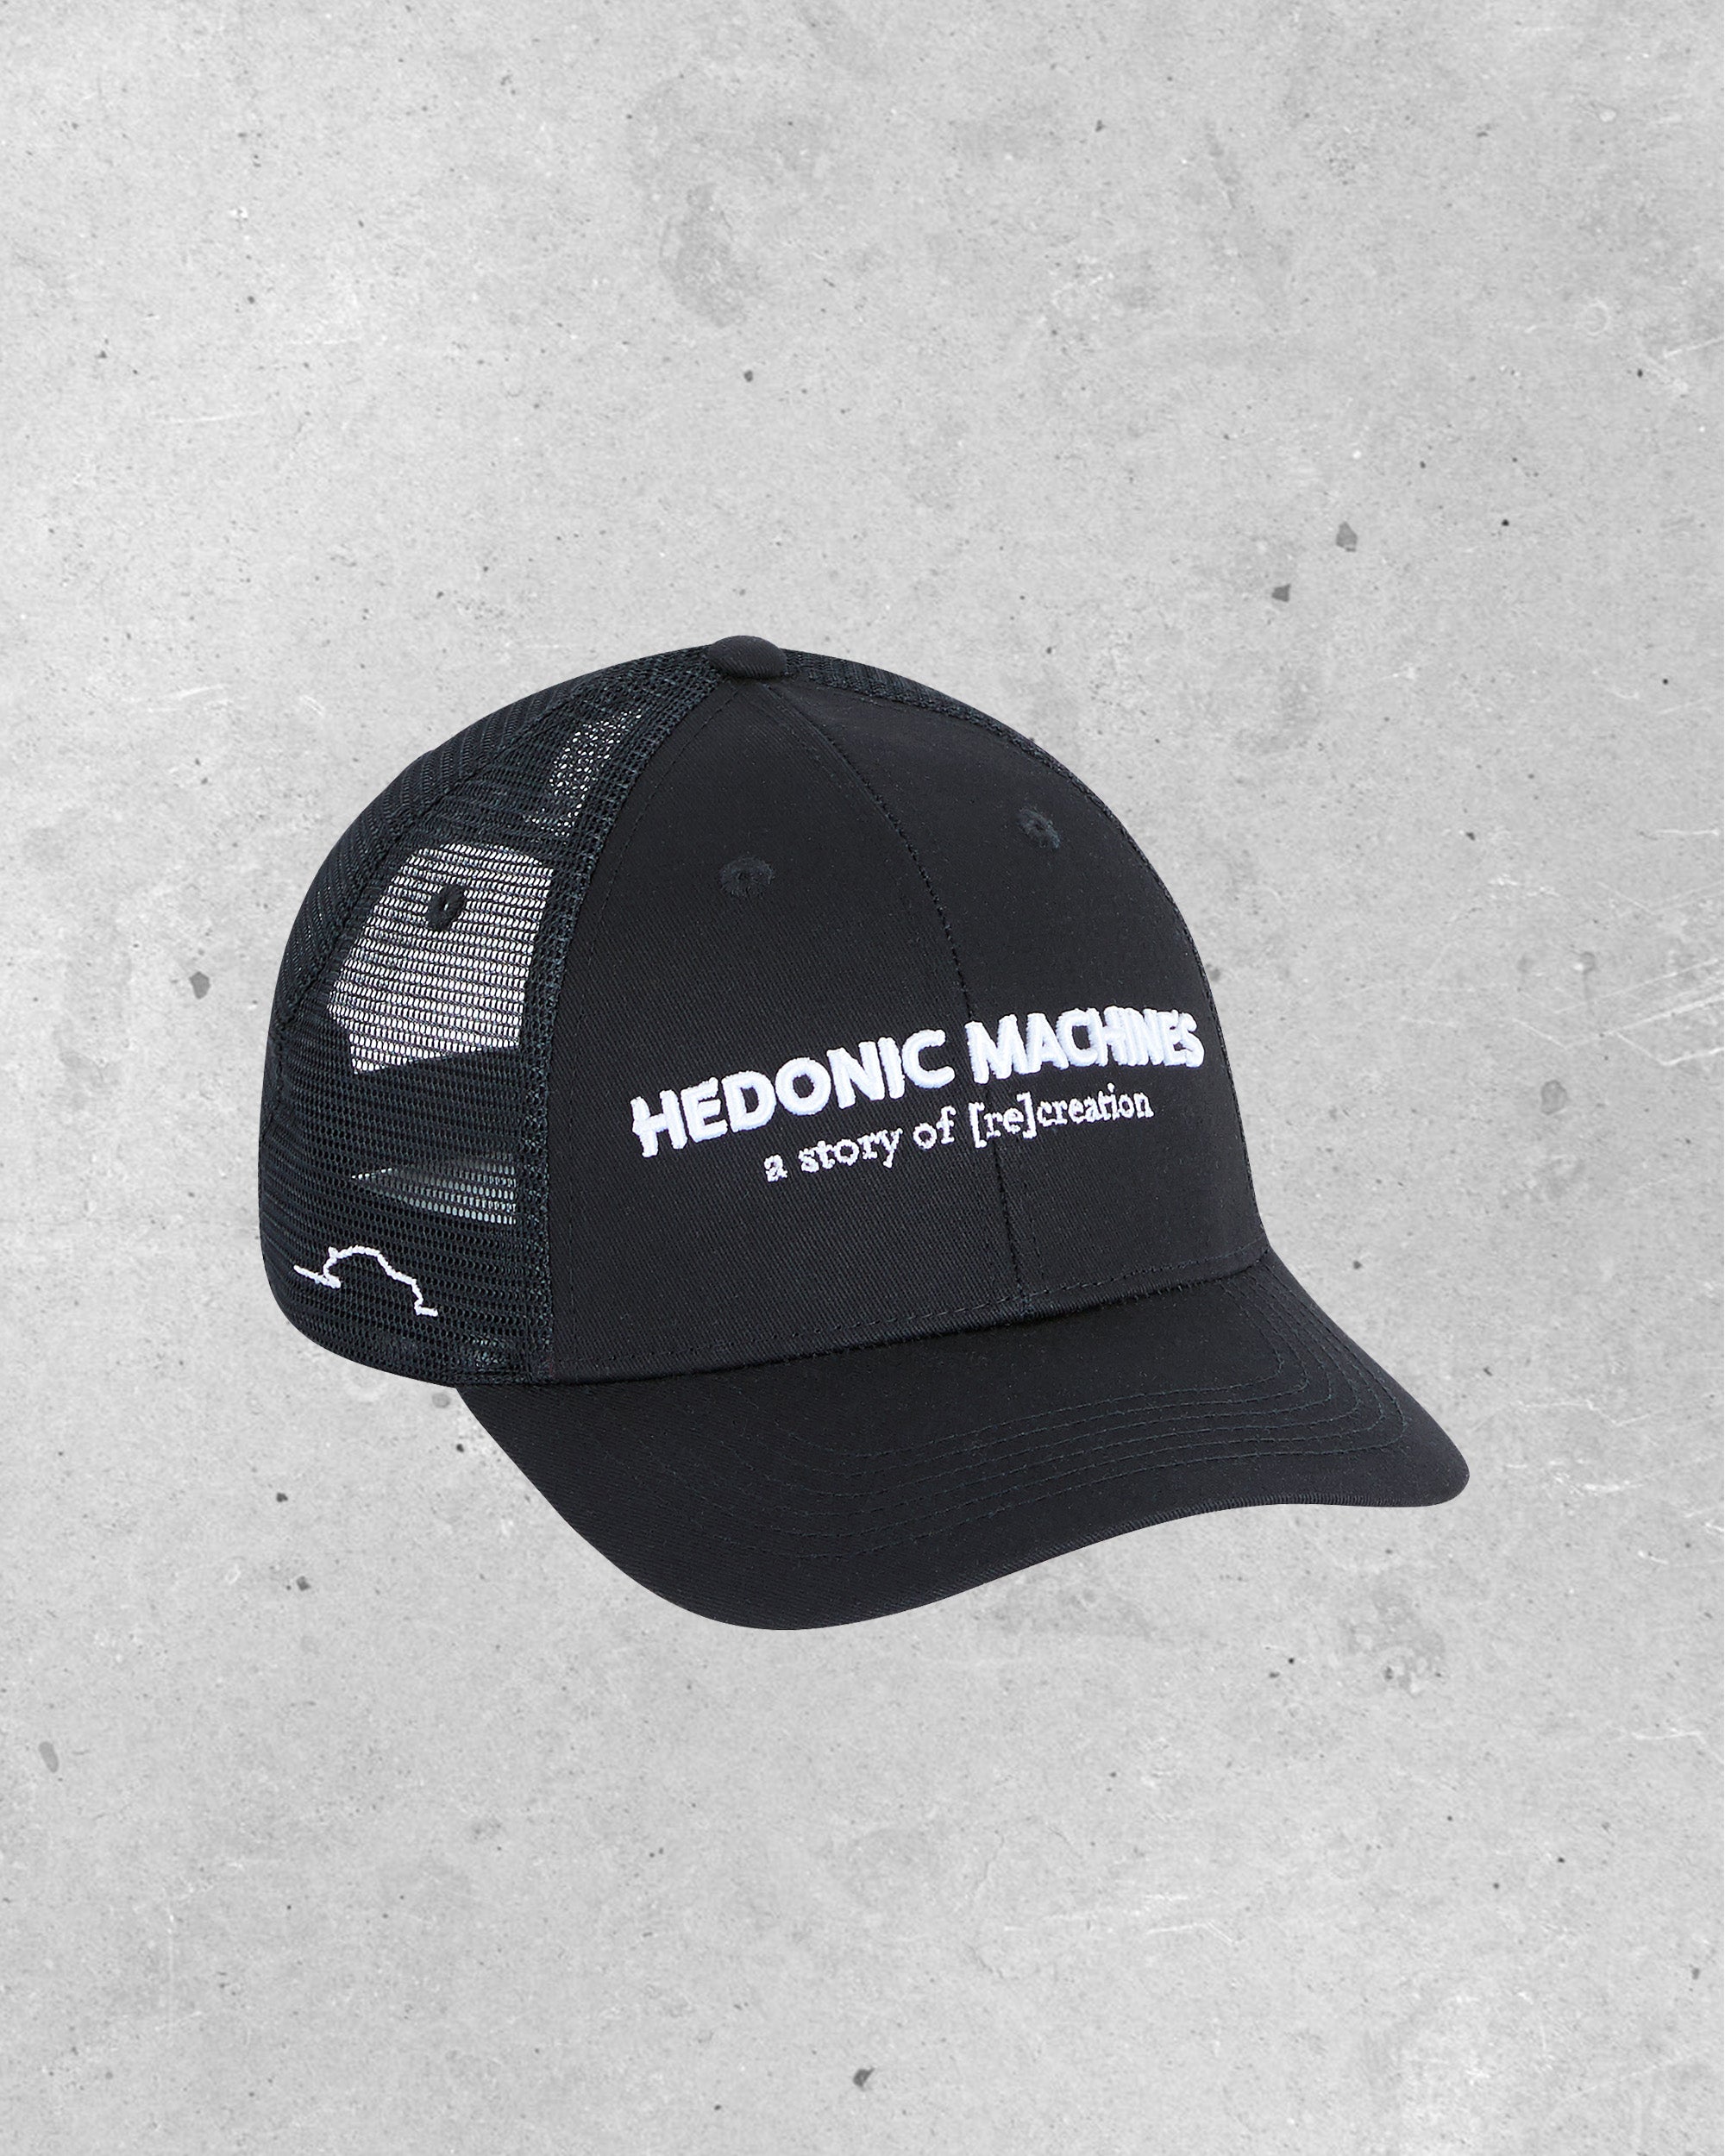 Casquette Hedonic - story of [re]creation - noire mesh